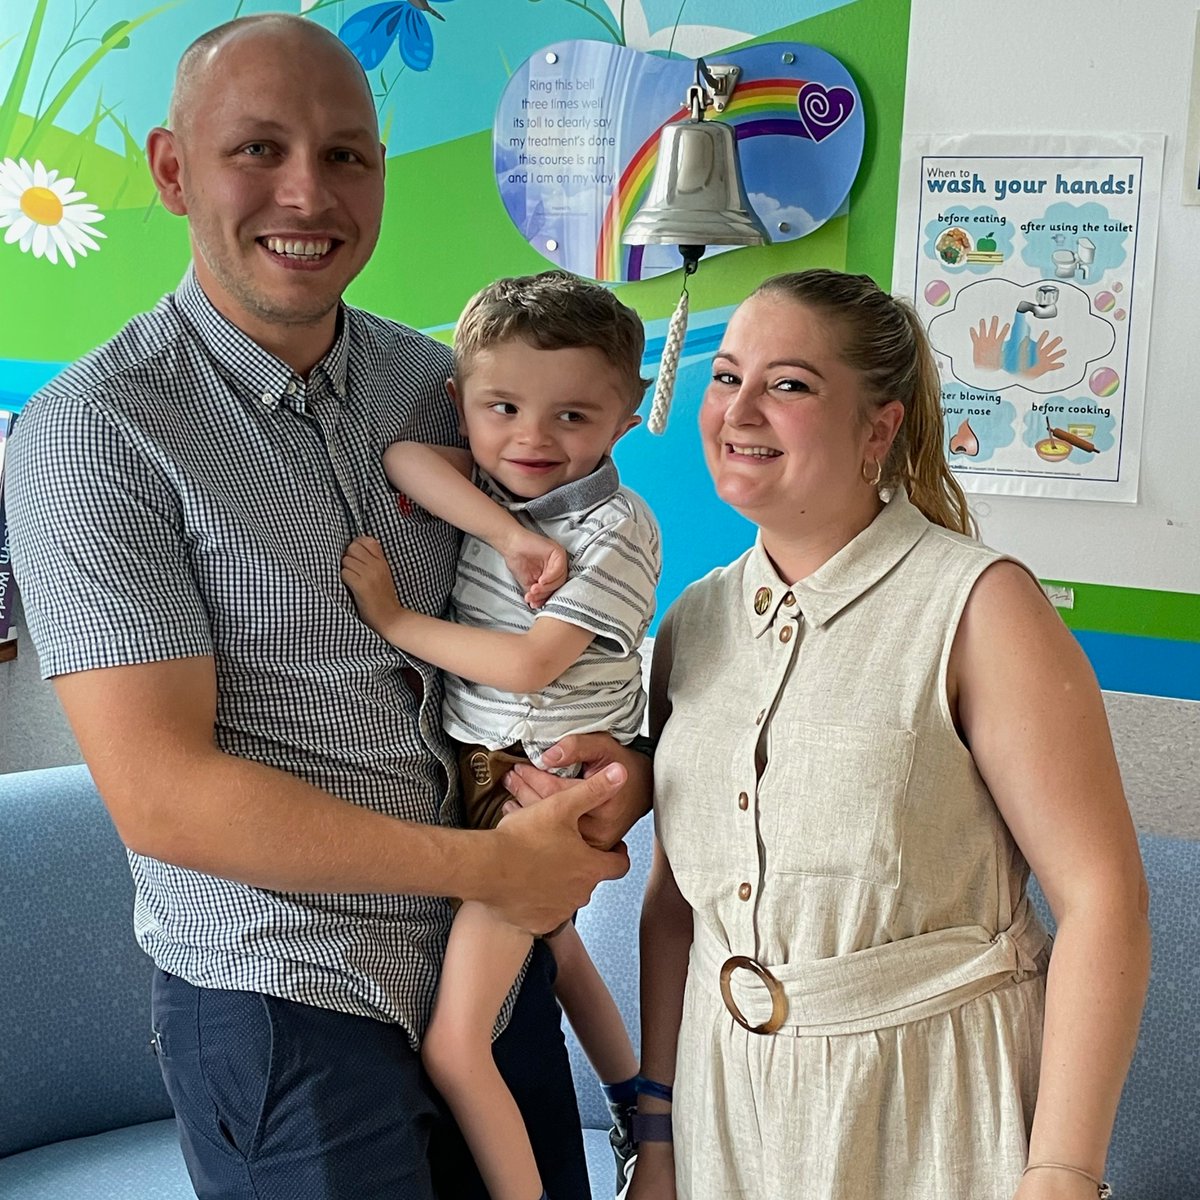 Since his diagnosis, Oliver has gone on to ring the end-of-treatment bell, thanks to the incredible care he received at Nottingham Children's Hospital. Fantastic! Help support patients like Oliver to get the best care possible: nottinghamhospitalscharity.org.uk/donate/our-app…